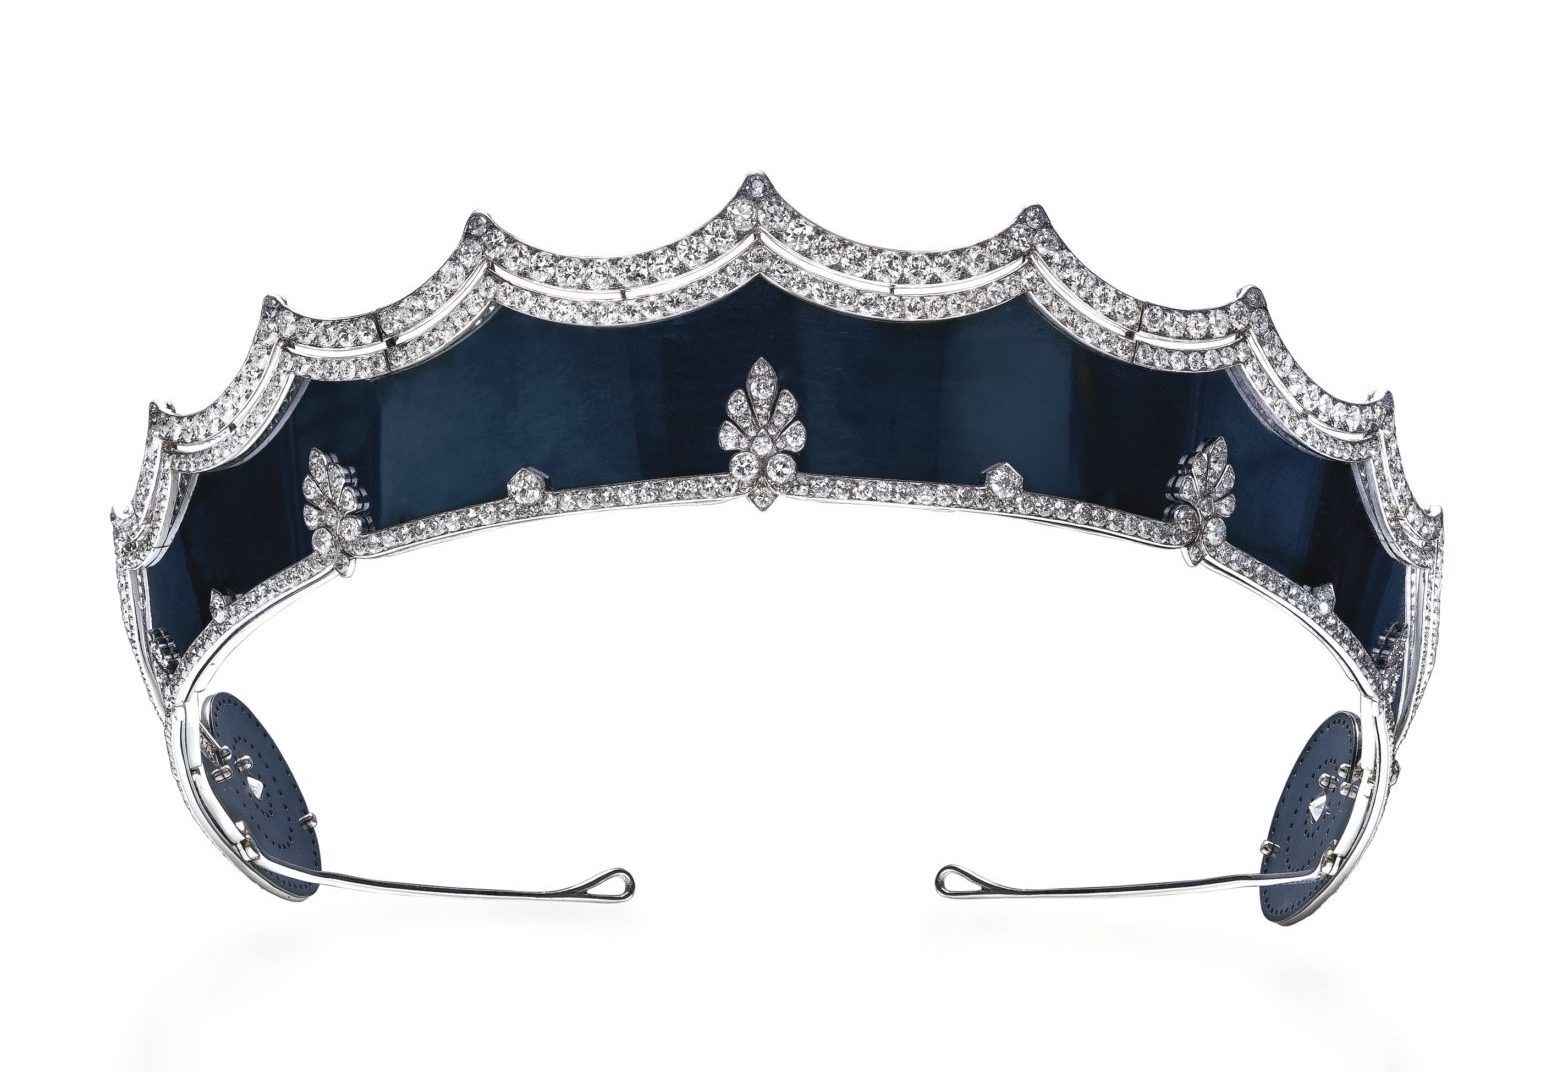 Early 20th century steel and diamond tiara by Carier, estimate CHF350,000-500,000